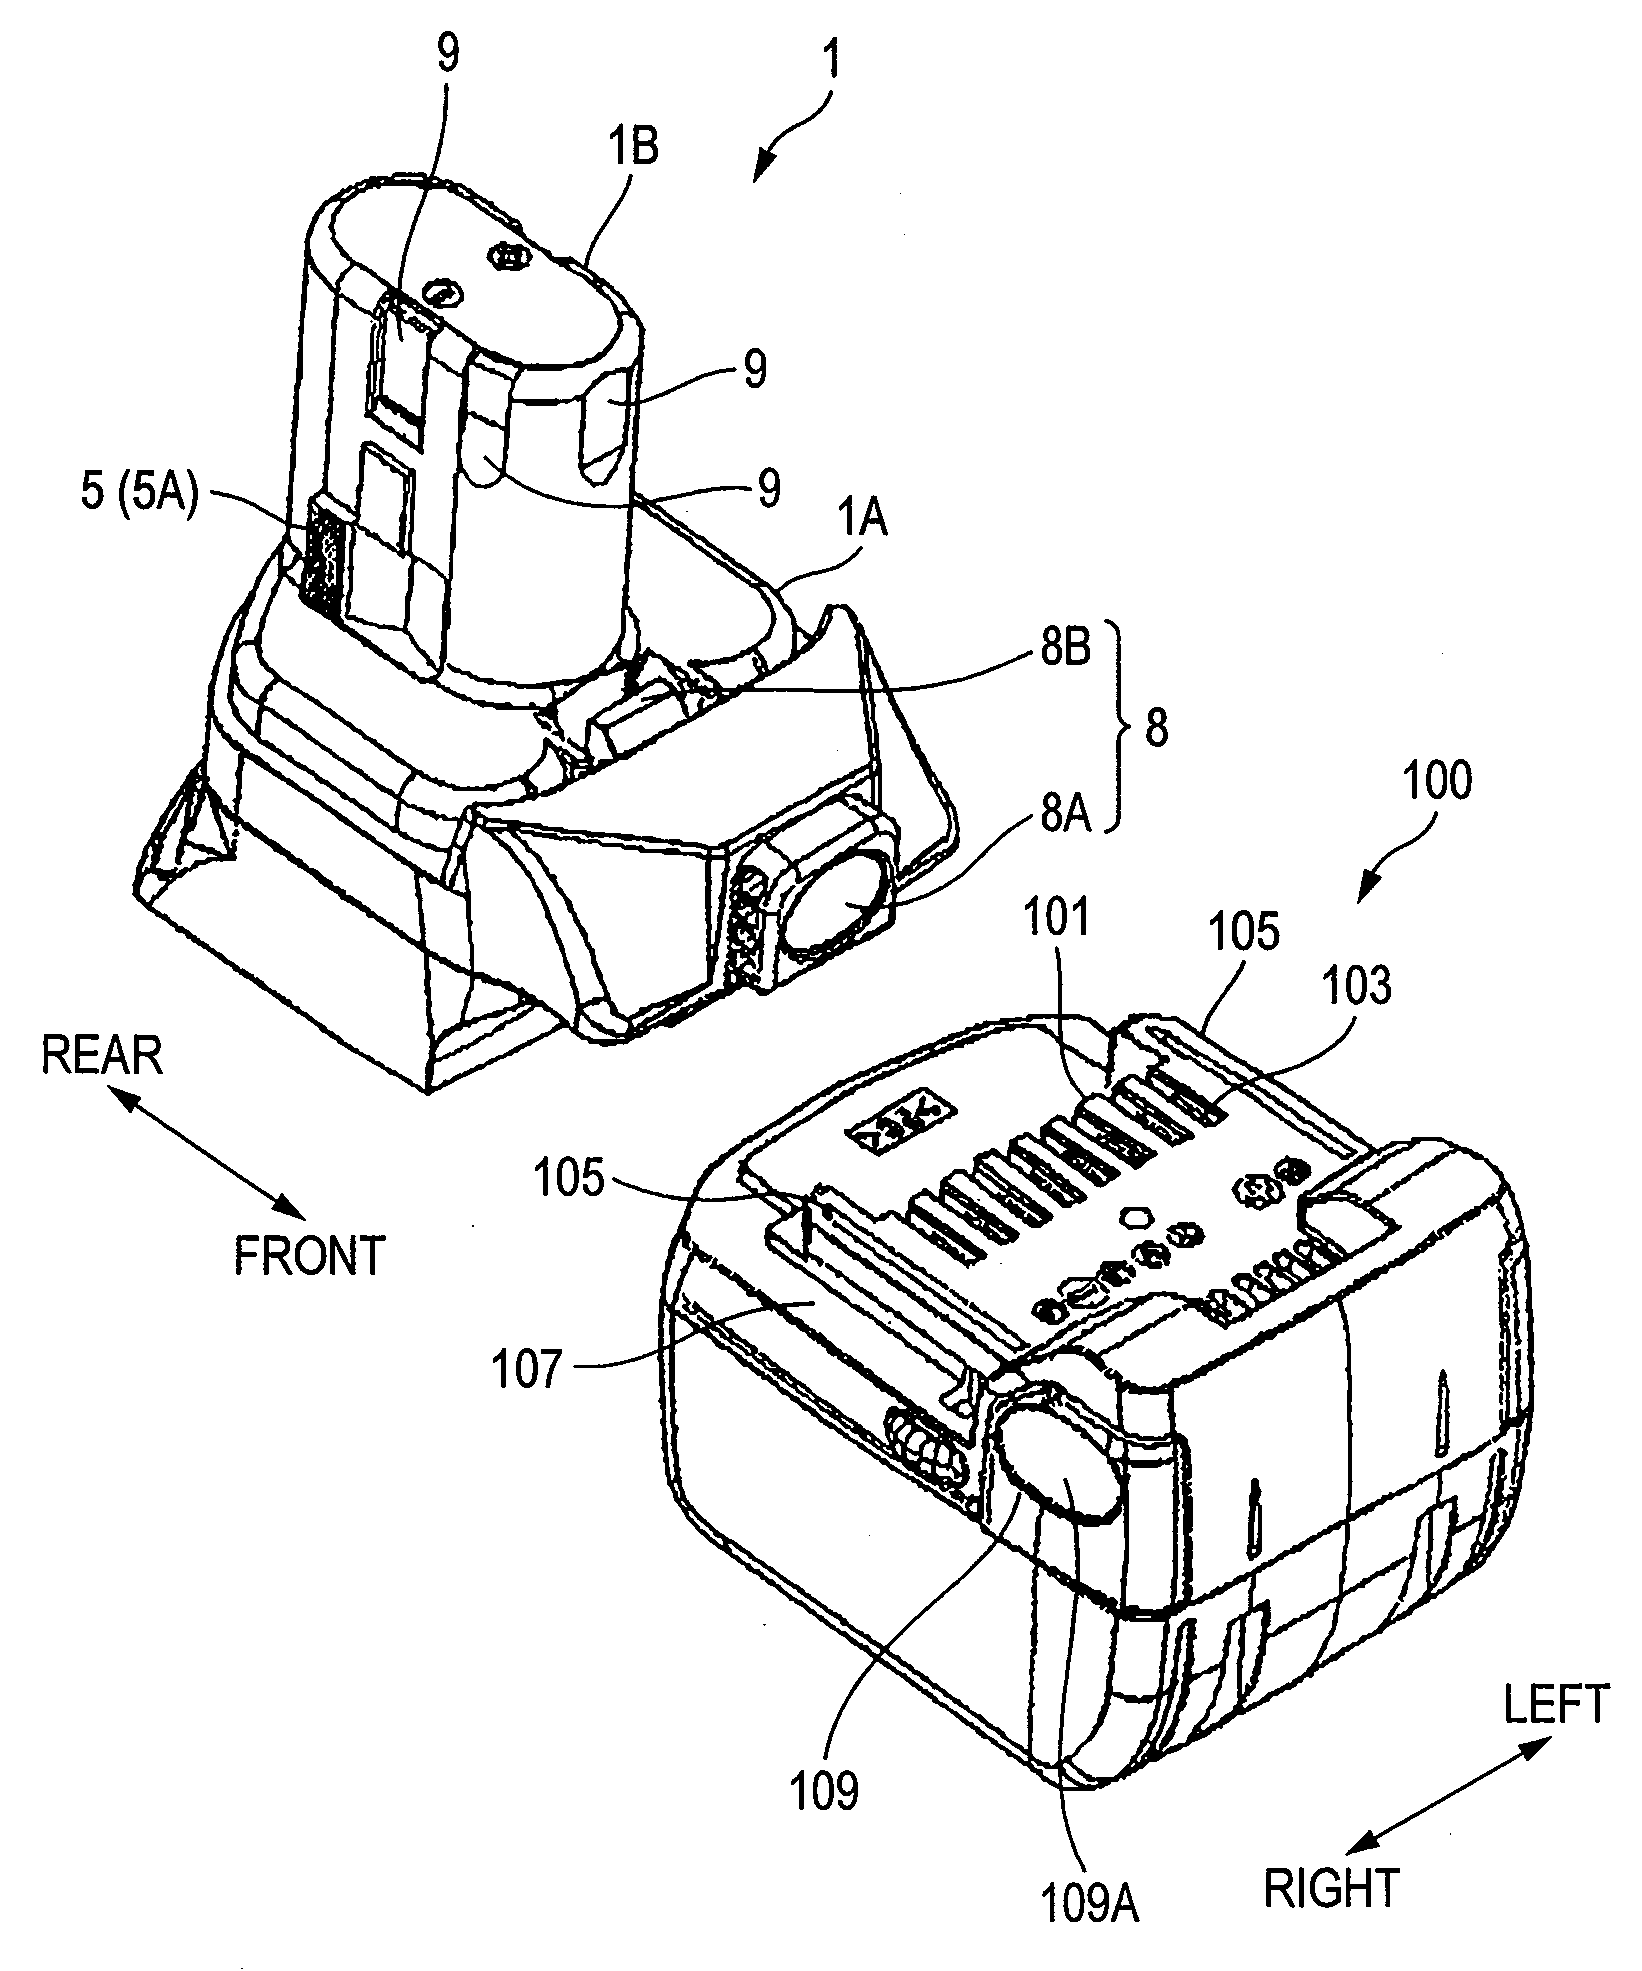 Adaptor, assembly of battery pack and adaptor, and electric tool with the same